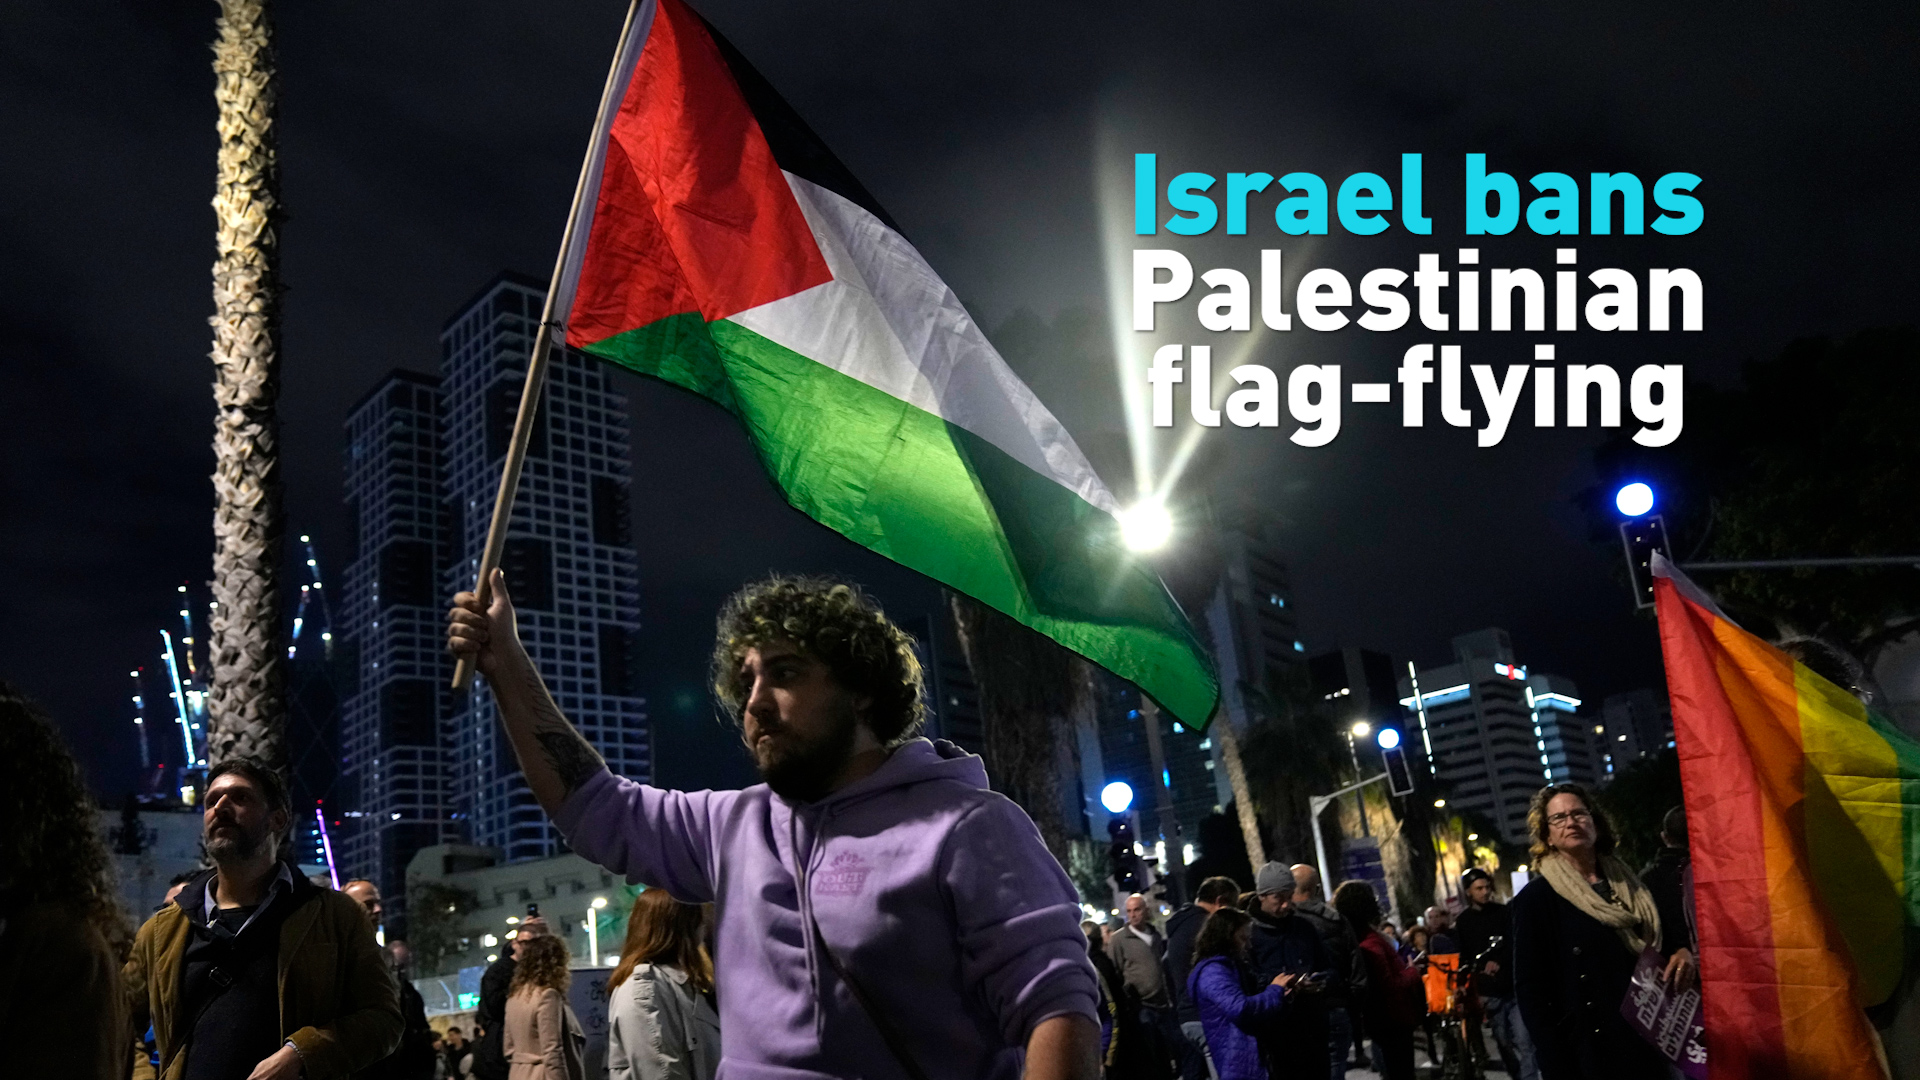 Israel bans Palestinian flag-flying in latest punitive move